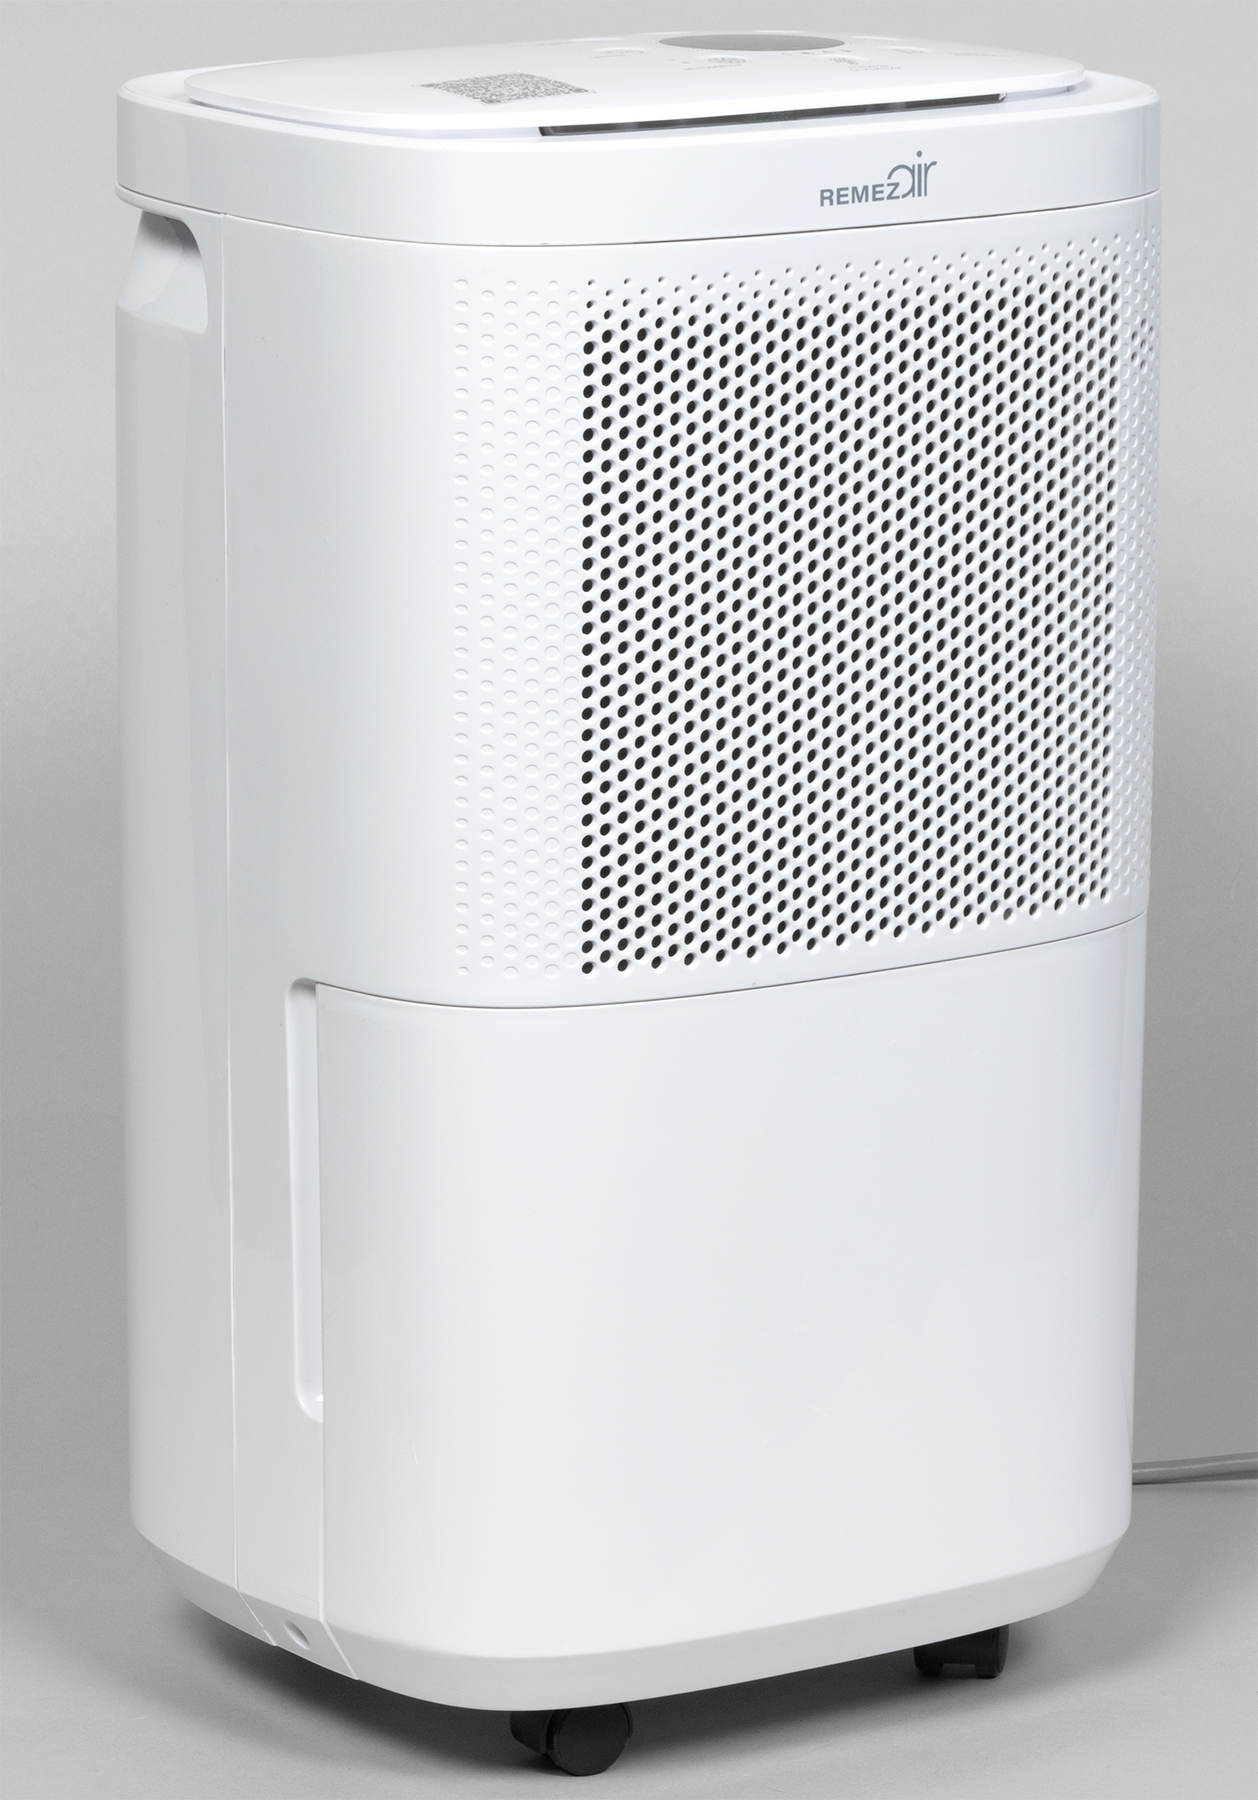 Looking to Buy The Best Honeywell Dehumidifier in 2023. Here are The Top 10 Models to Consider